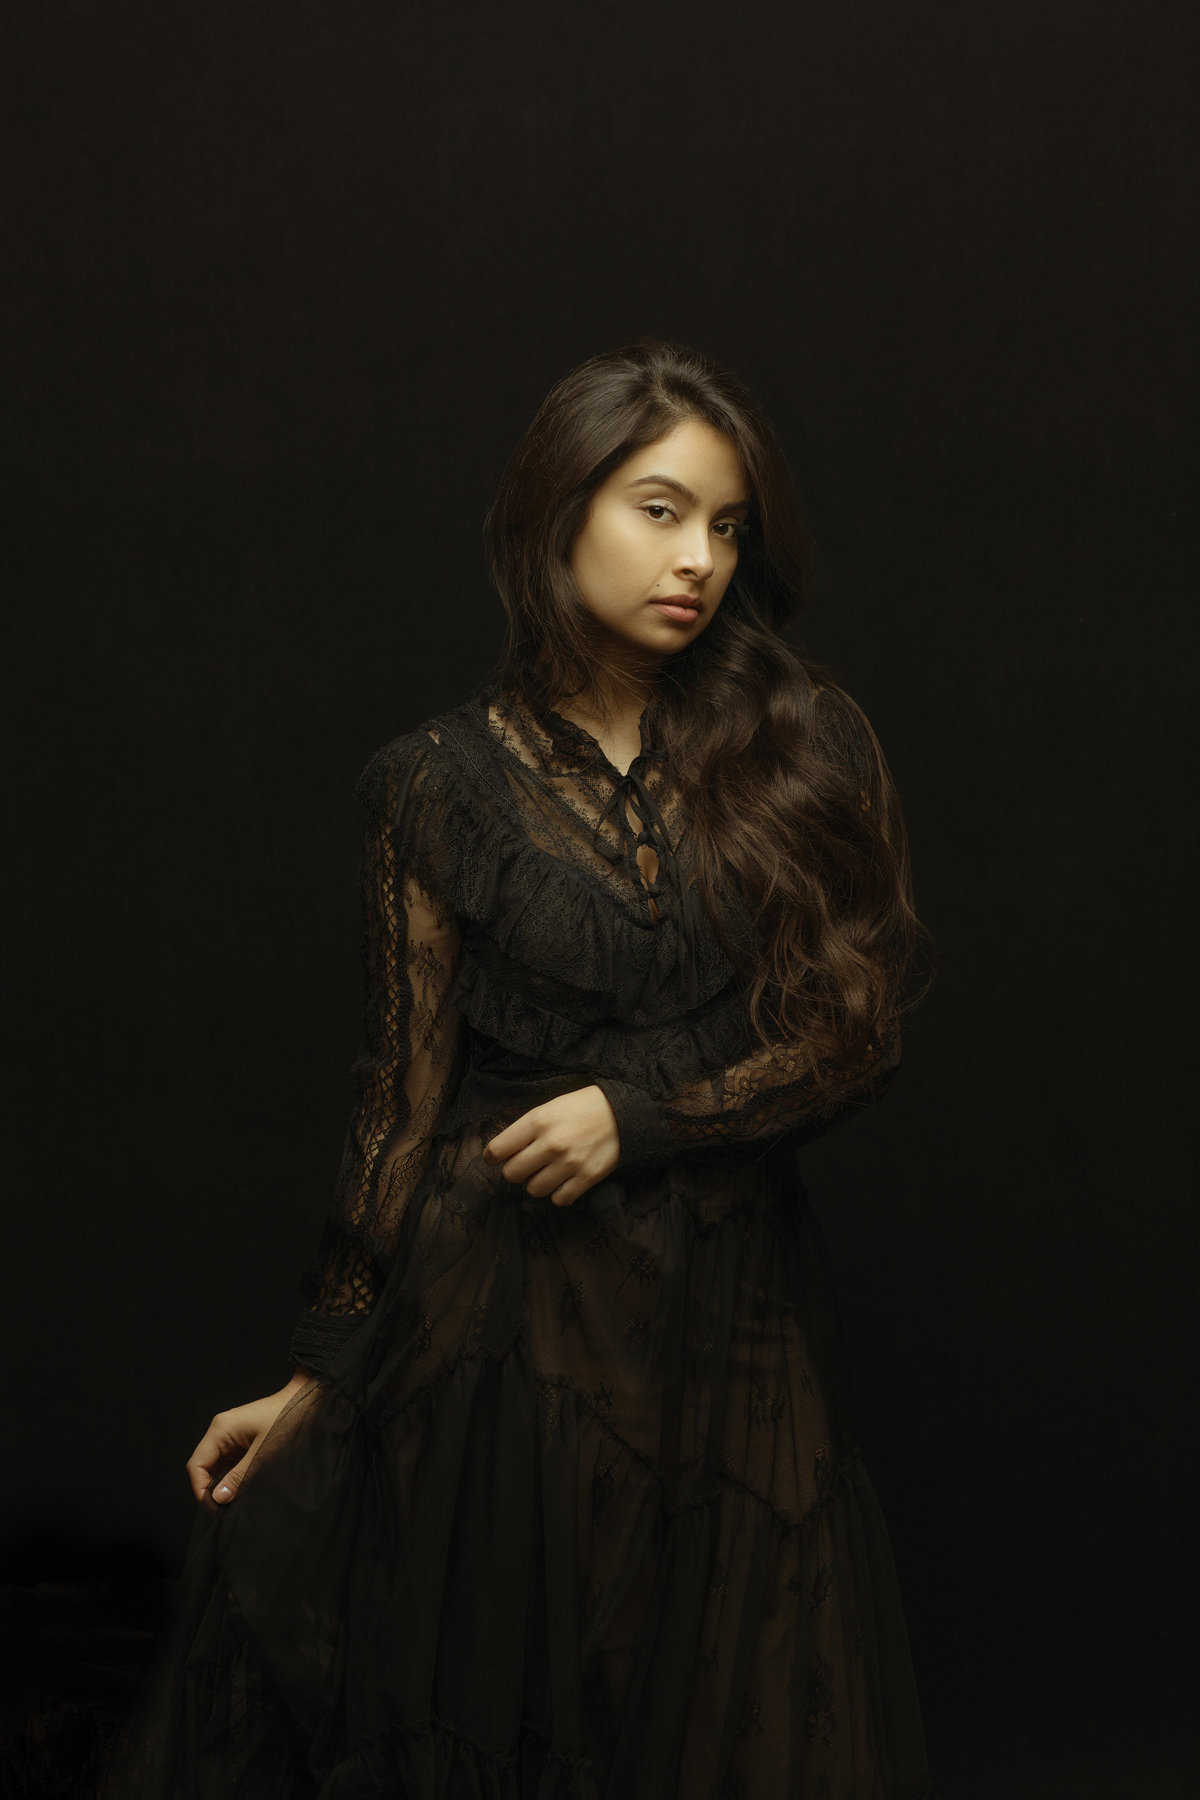 Portrait Photo Of Young Woman In Black Dress Standing Los Angeles